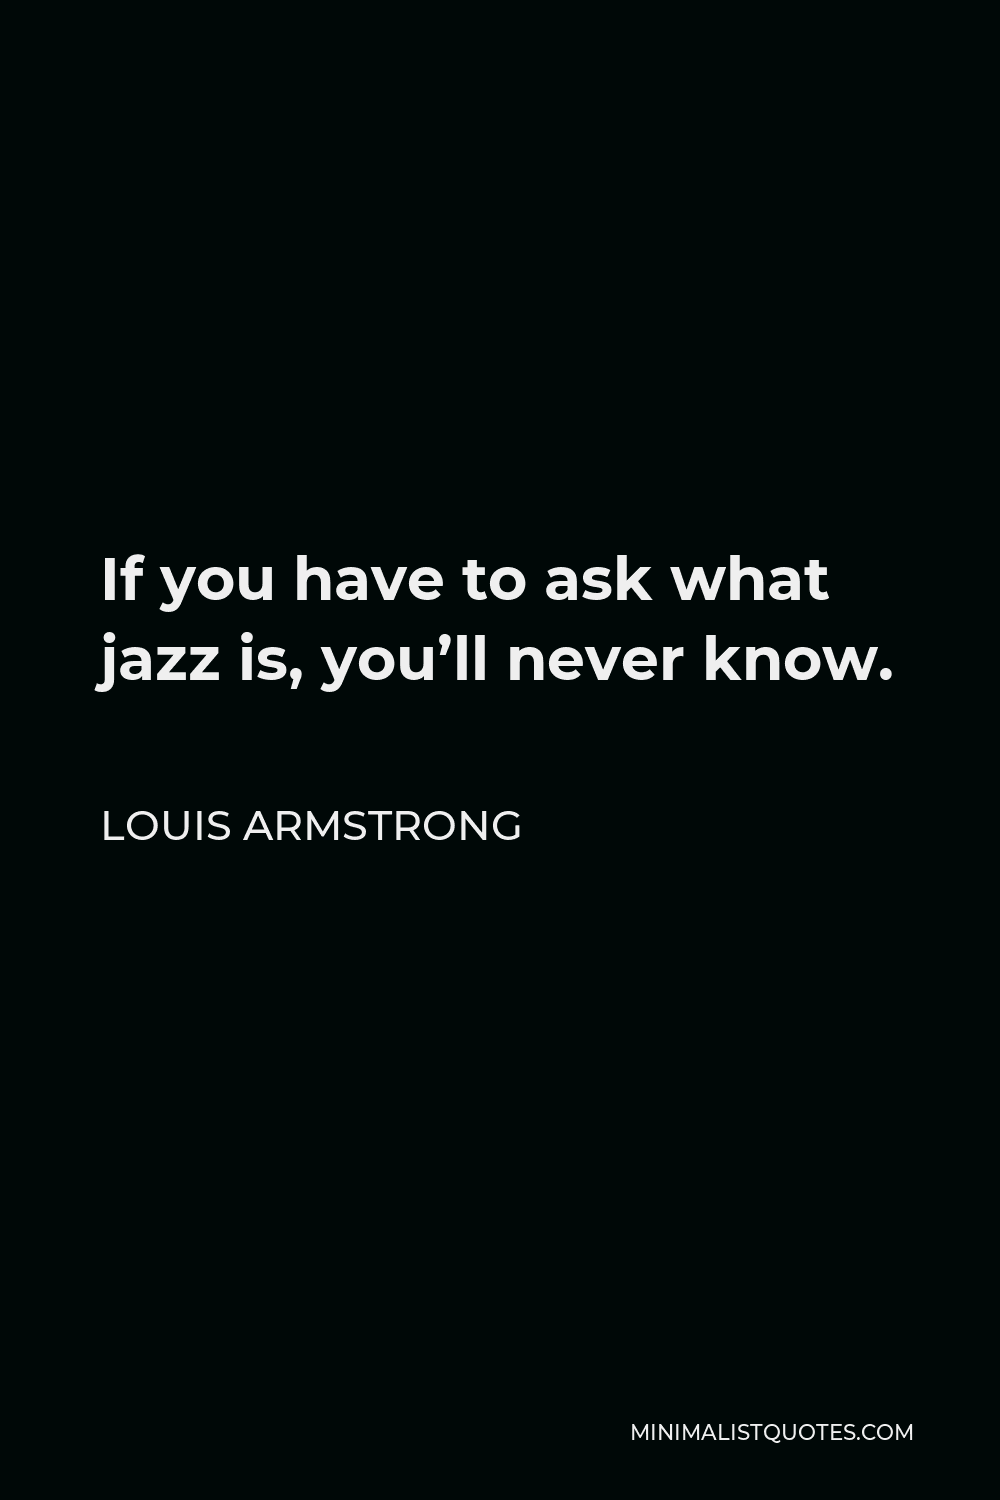 Louis Armstrong Quote: If you have to ask what jazz is, you'll never know.